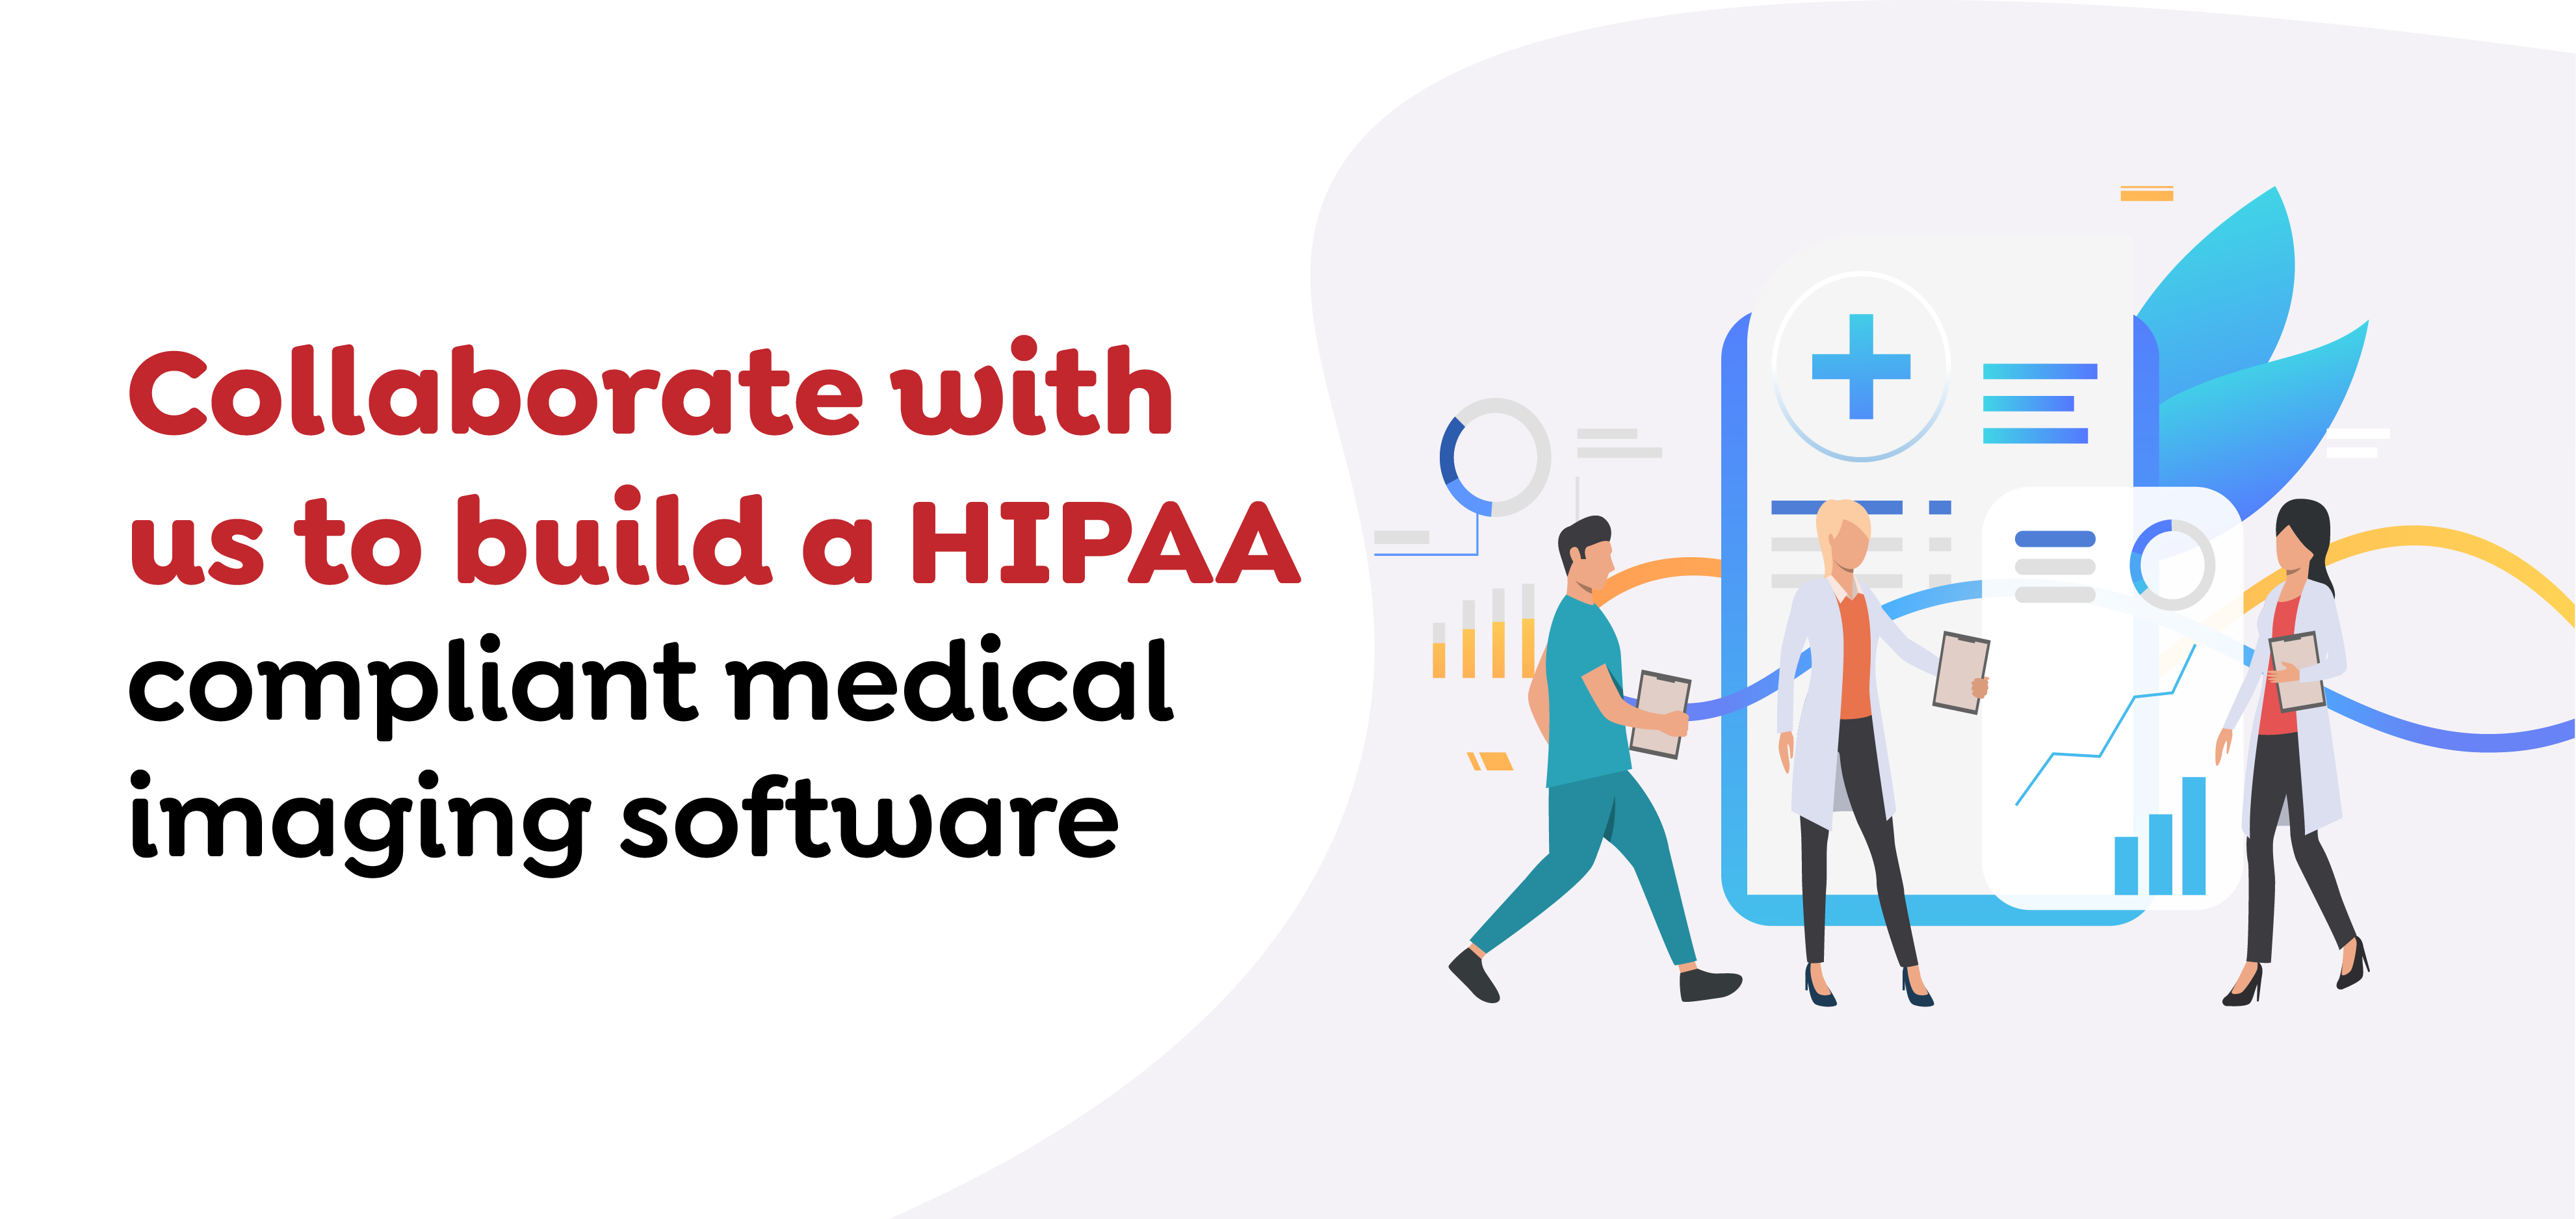 HIPAA-compliant medical imaging software